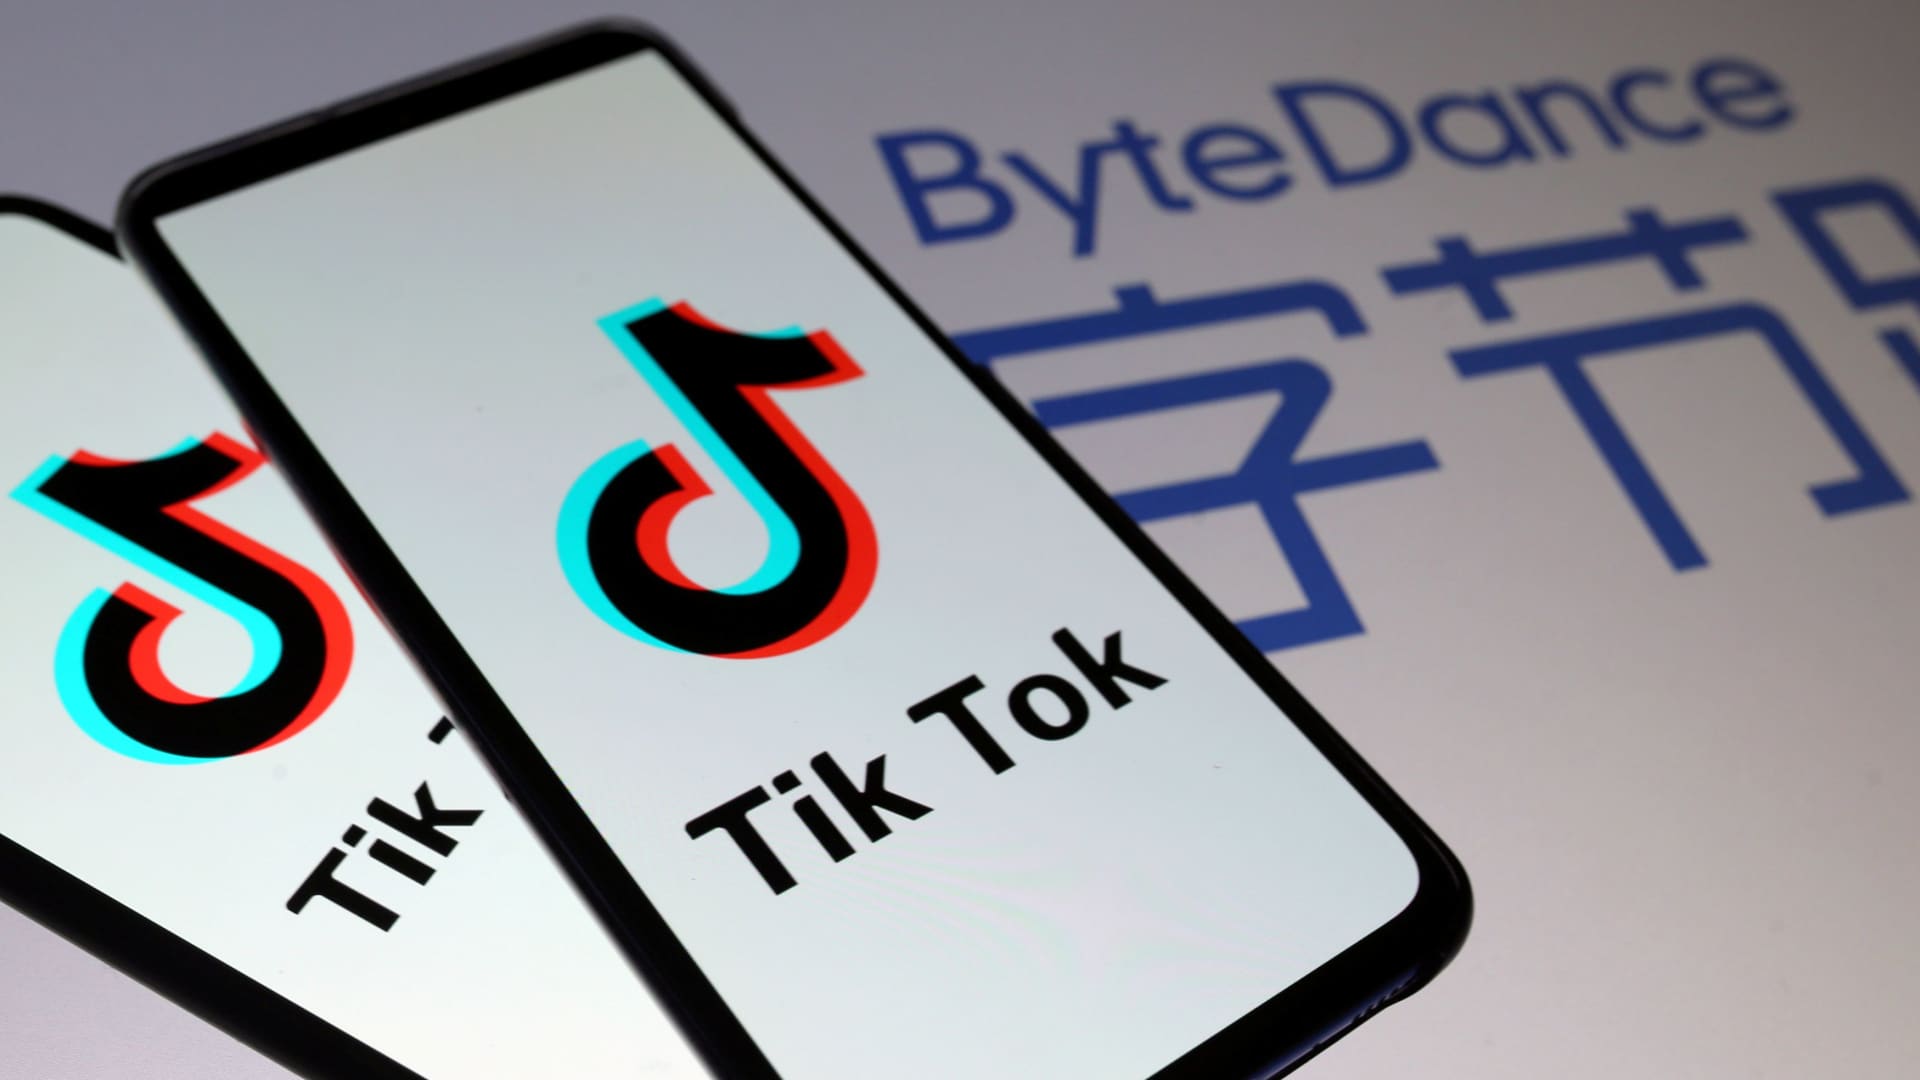 U.S. TikTok exec says it's not a national security threat, it's just caught in geopolitical clash